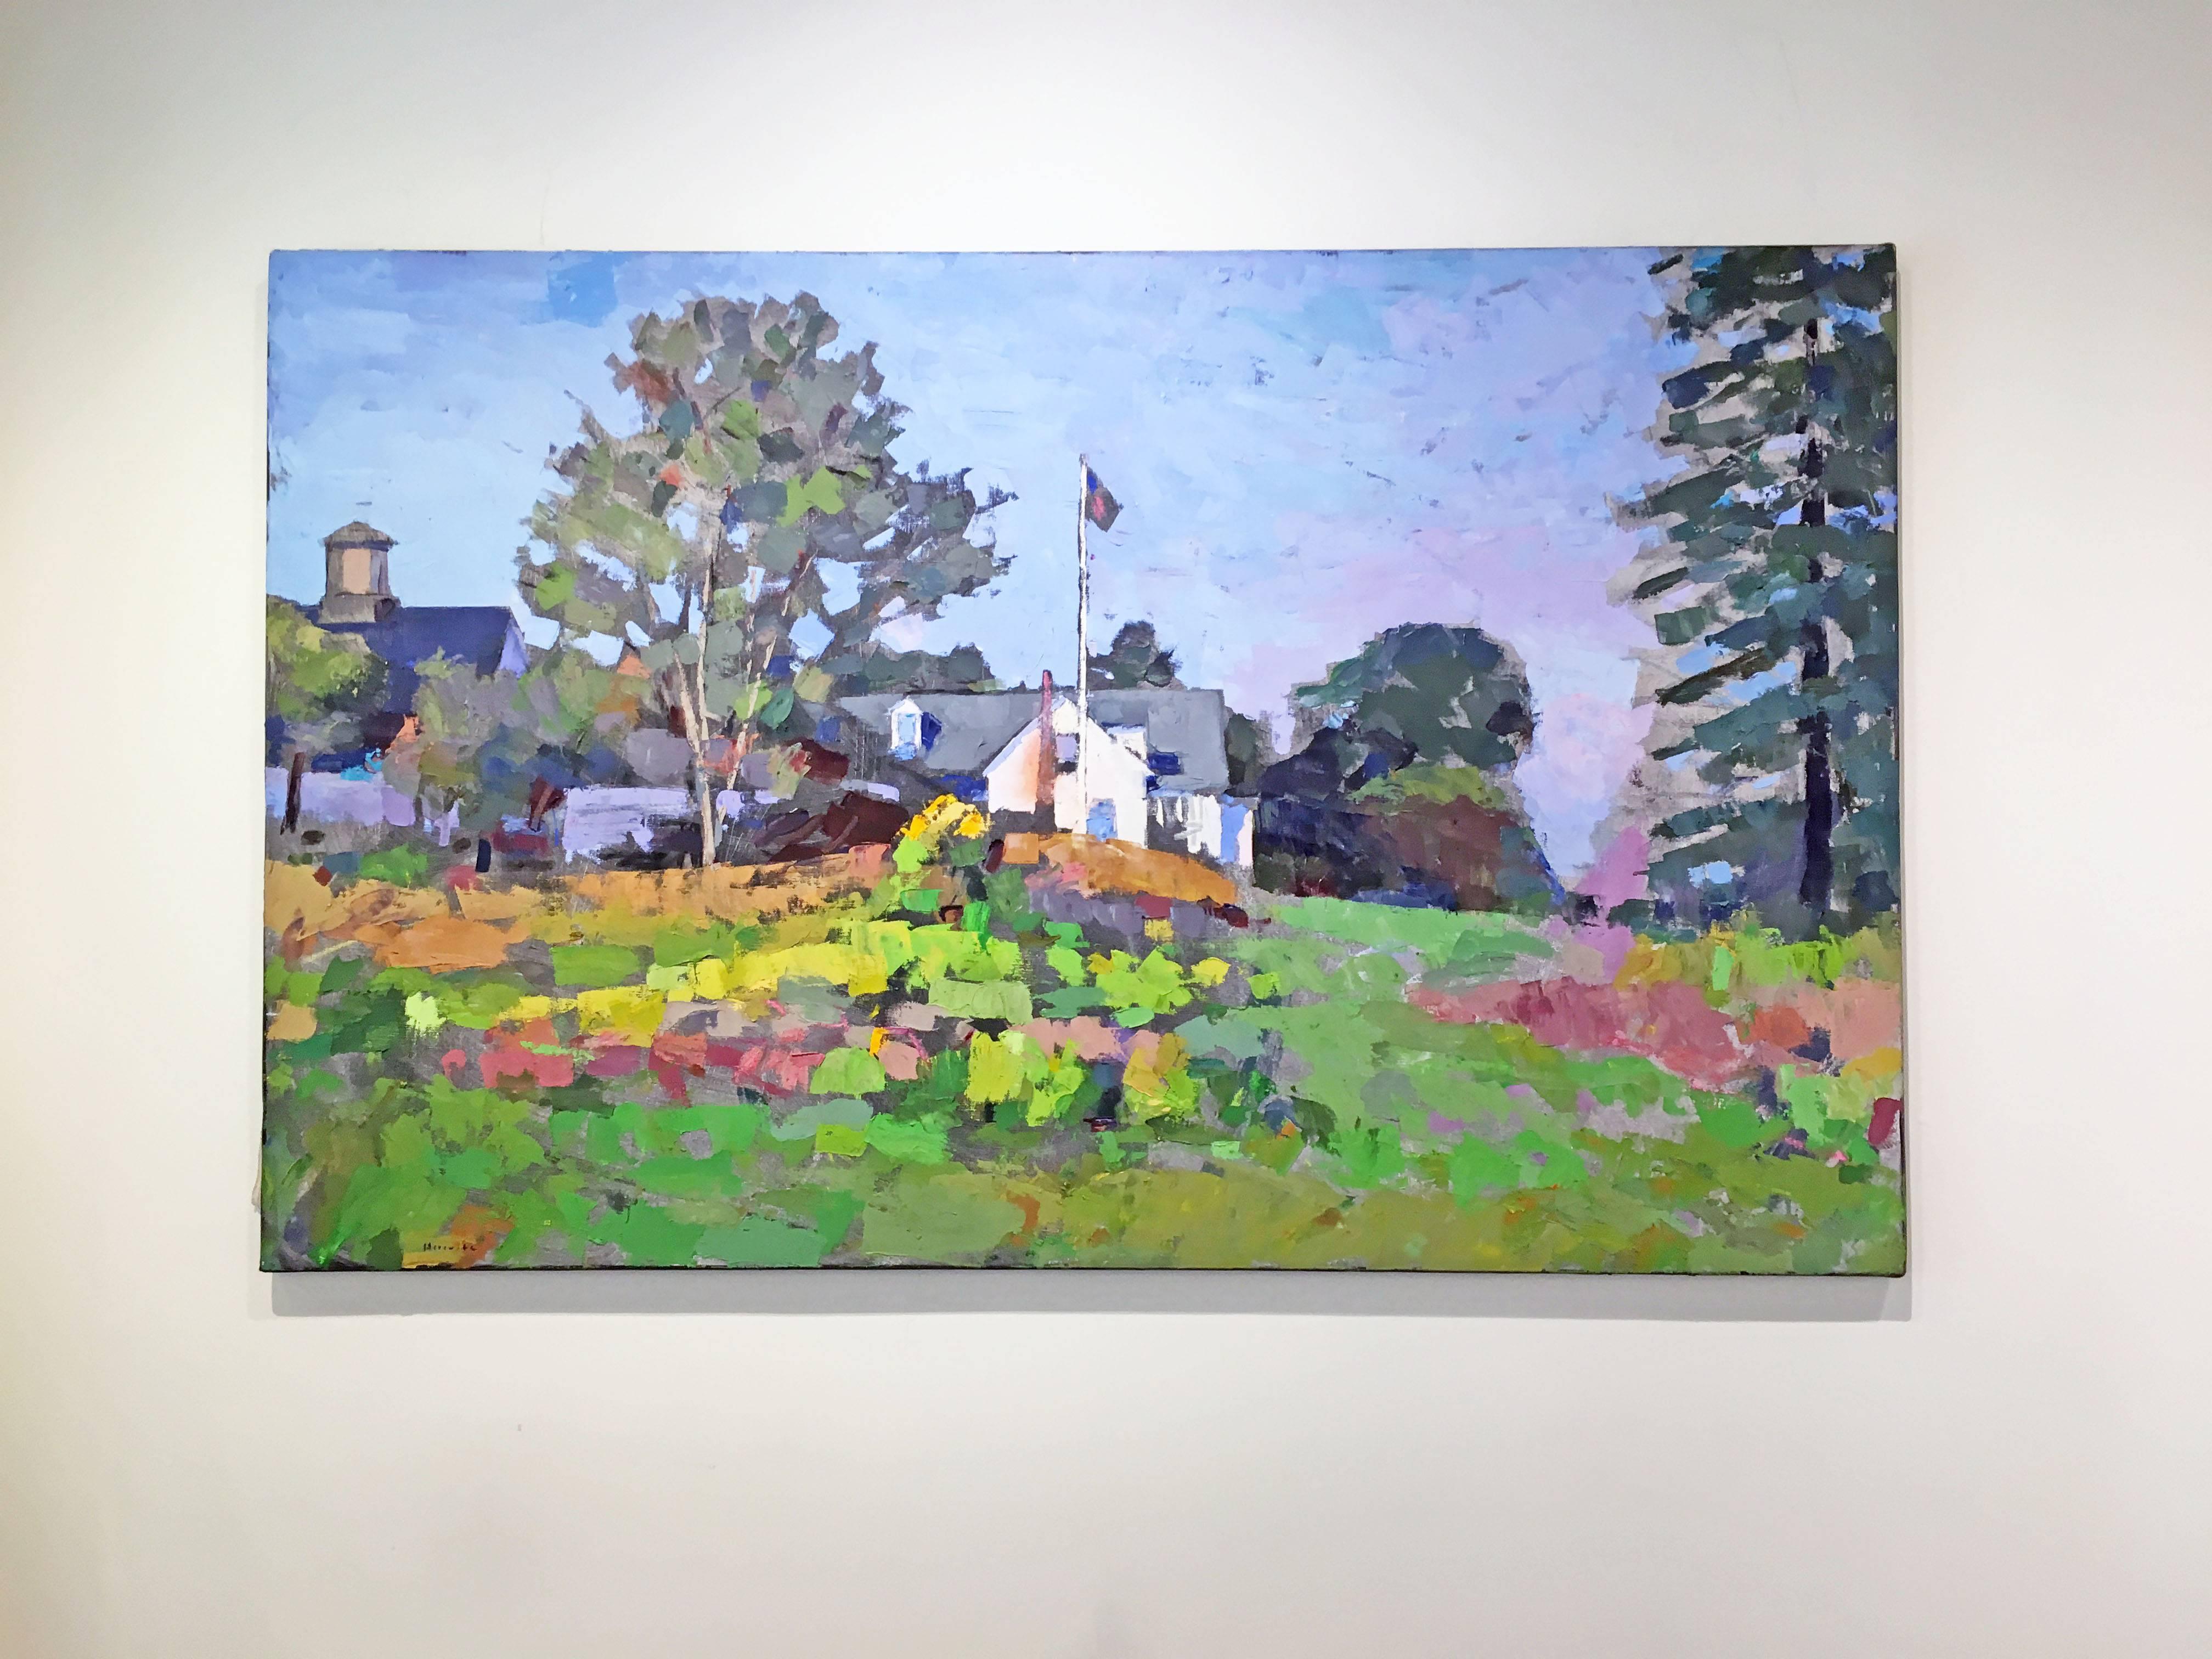 Sunday Morning by Larry Horowitz, 2010, Oil on canvas, 44 x 70 in.
in Green, white, brown, and blue.

American landscape painter, Larry Horowitz, is widely recognized for his plein aire paintings of America's shore and countryside.  A student of